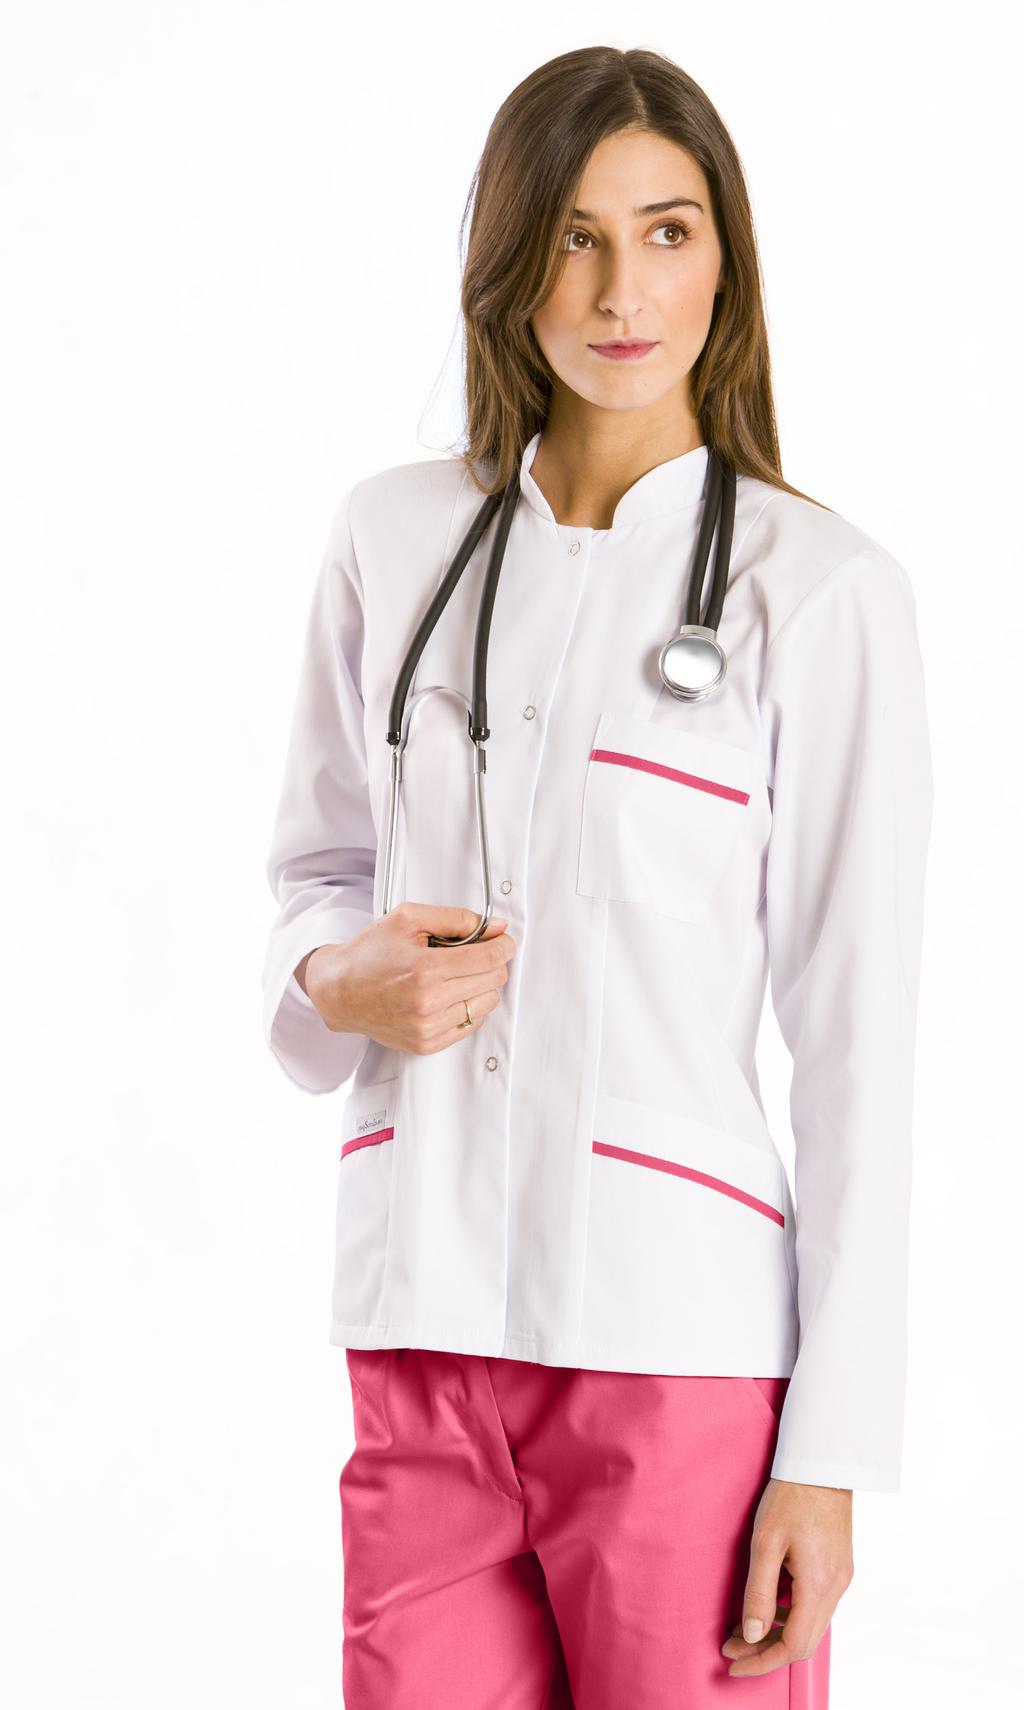 Best quality of medical fabrics All products are made from fabrics about the medical purpose.